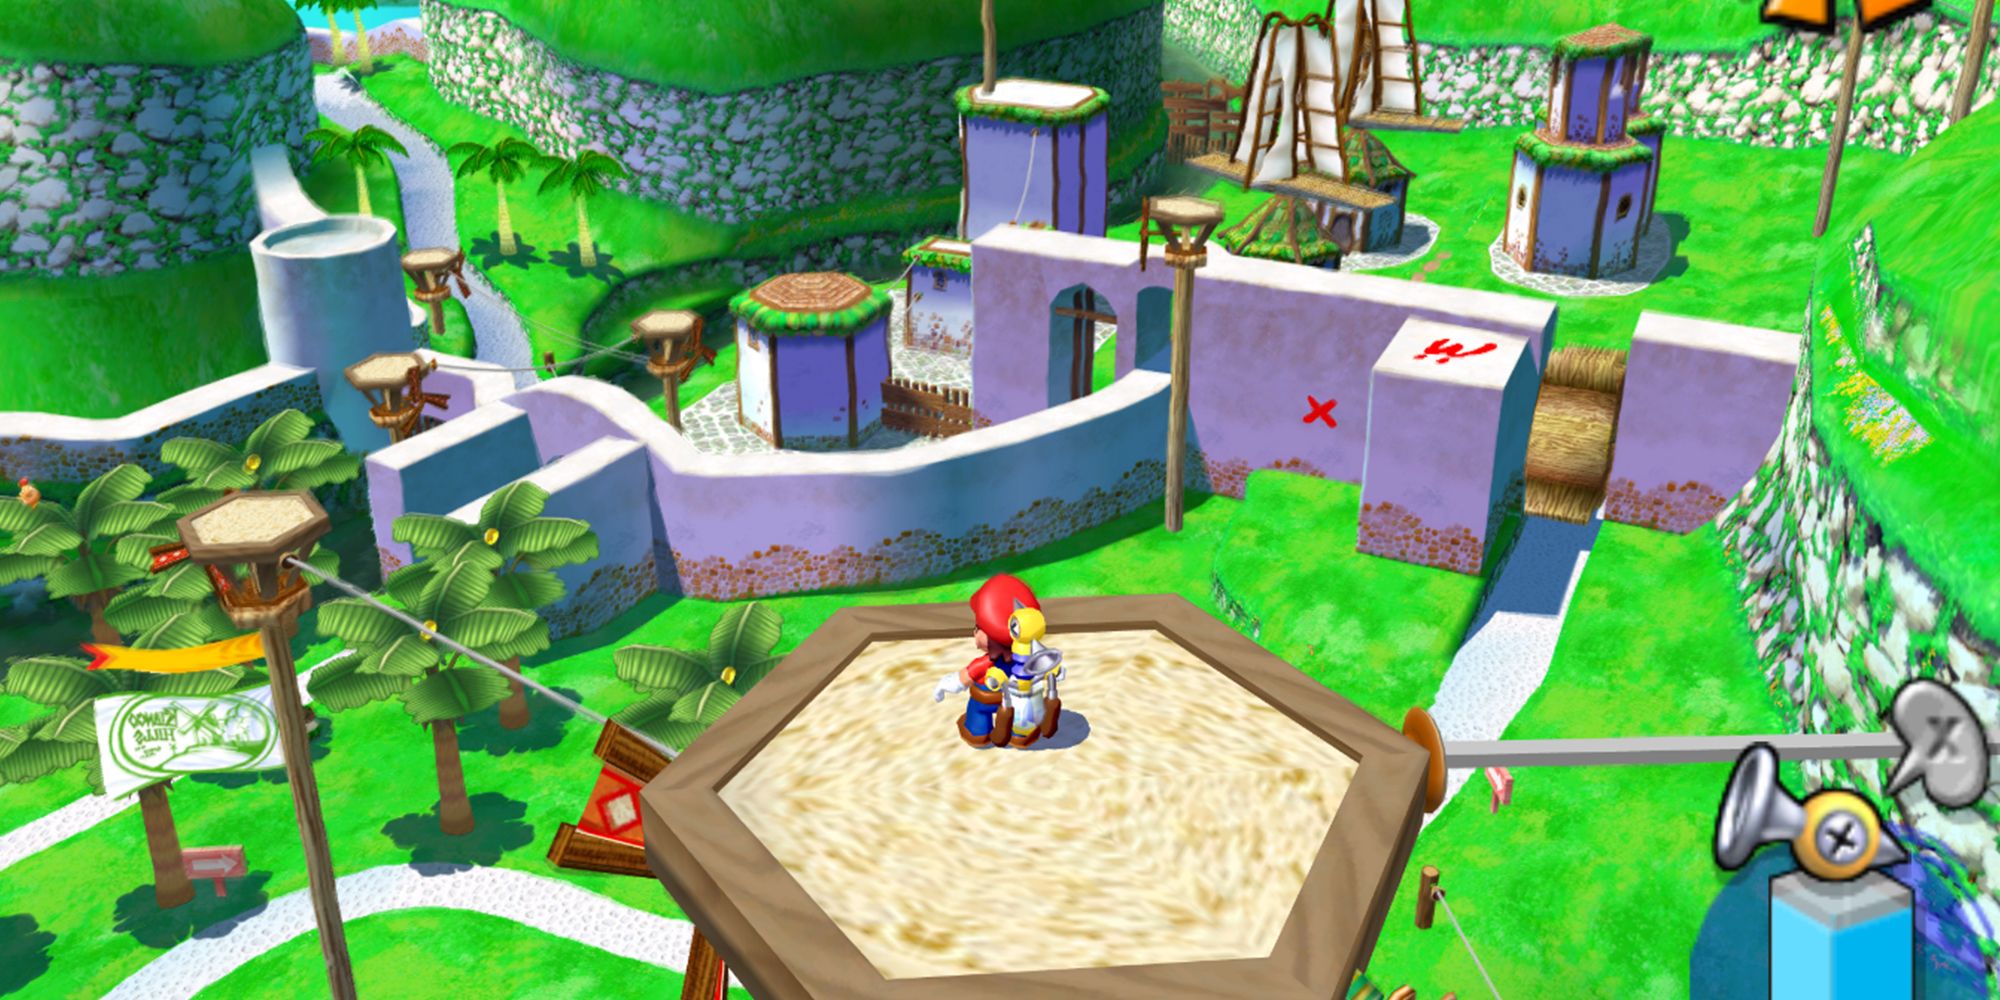 Super Mario Sunshine Bianco Hills, Mario standing on top of a platform looking down at the city